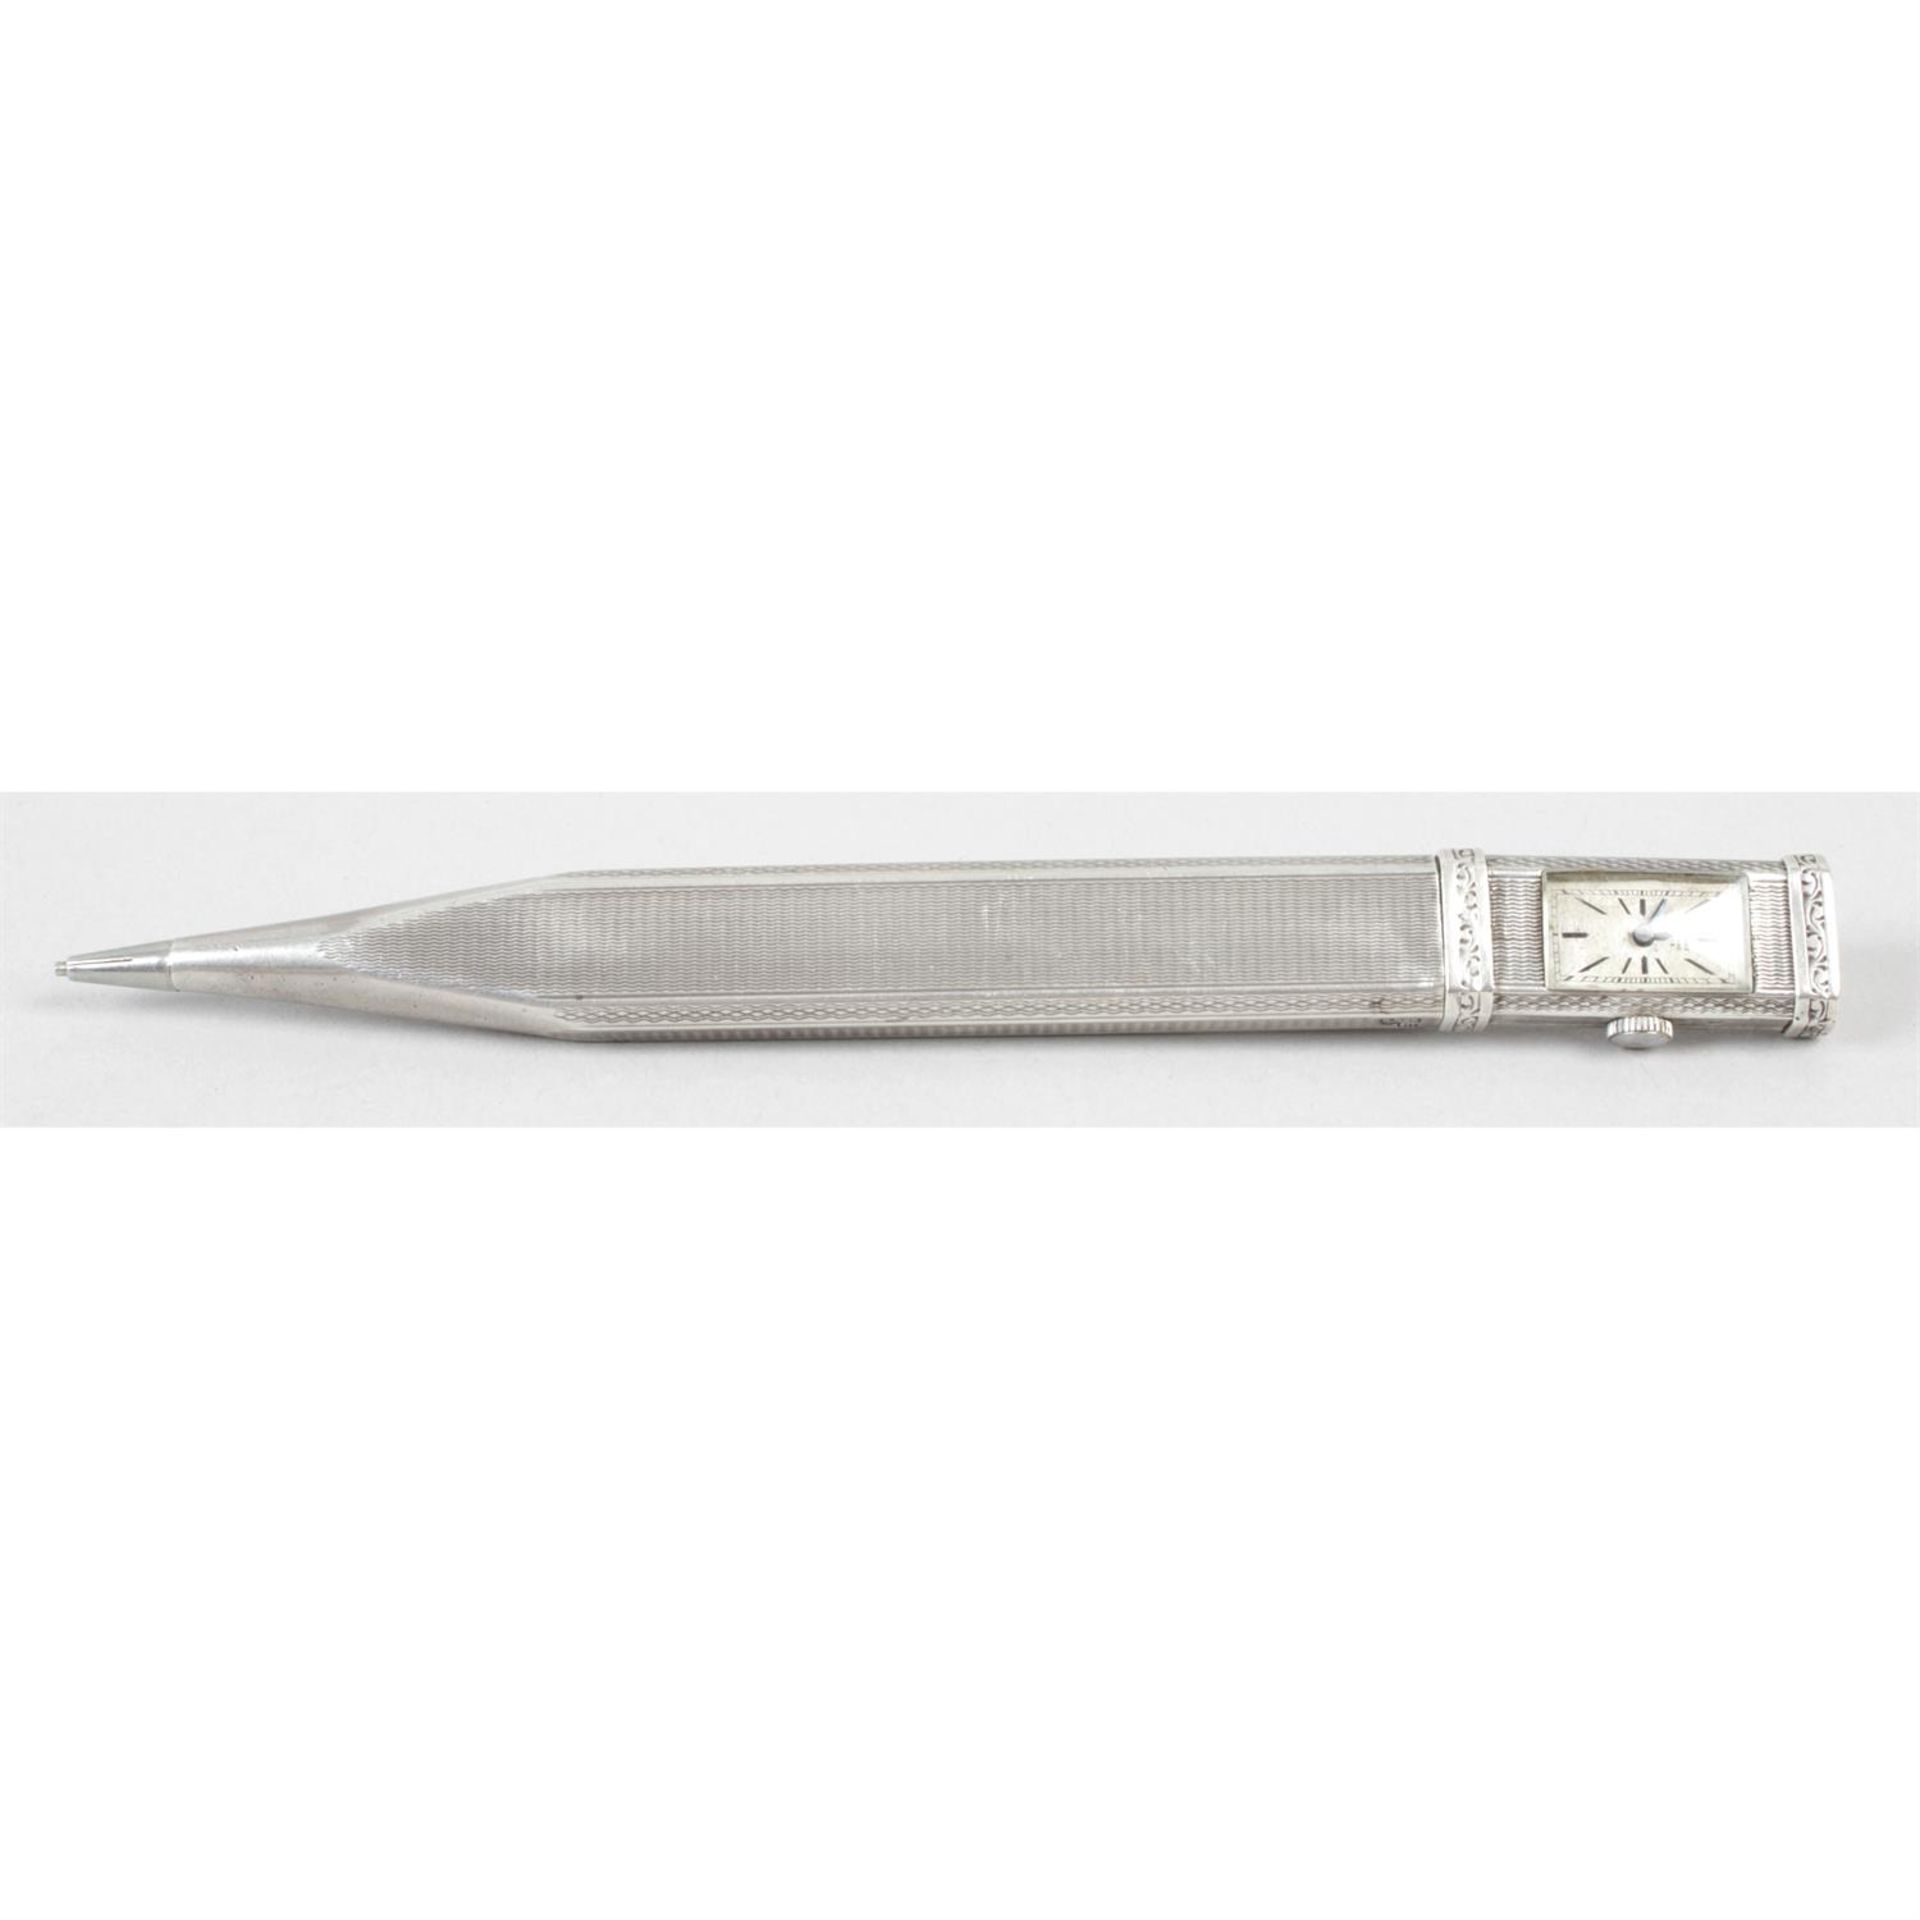 A 1920s/1930s Bucherer silver cased novelty propelling pencil with fitted mechanical watch to